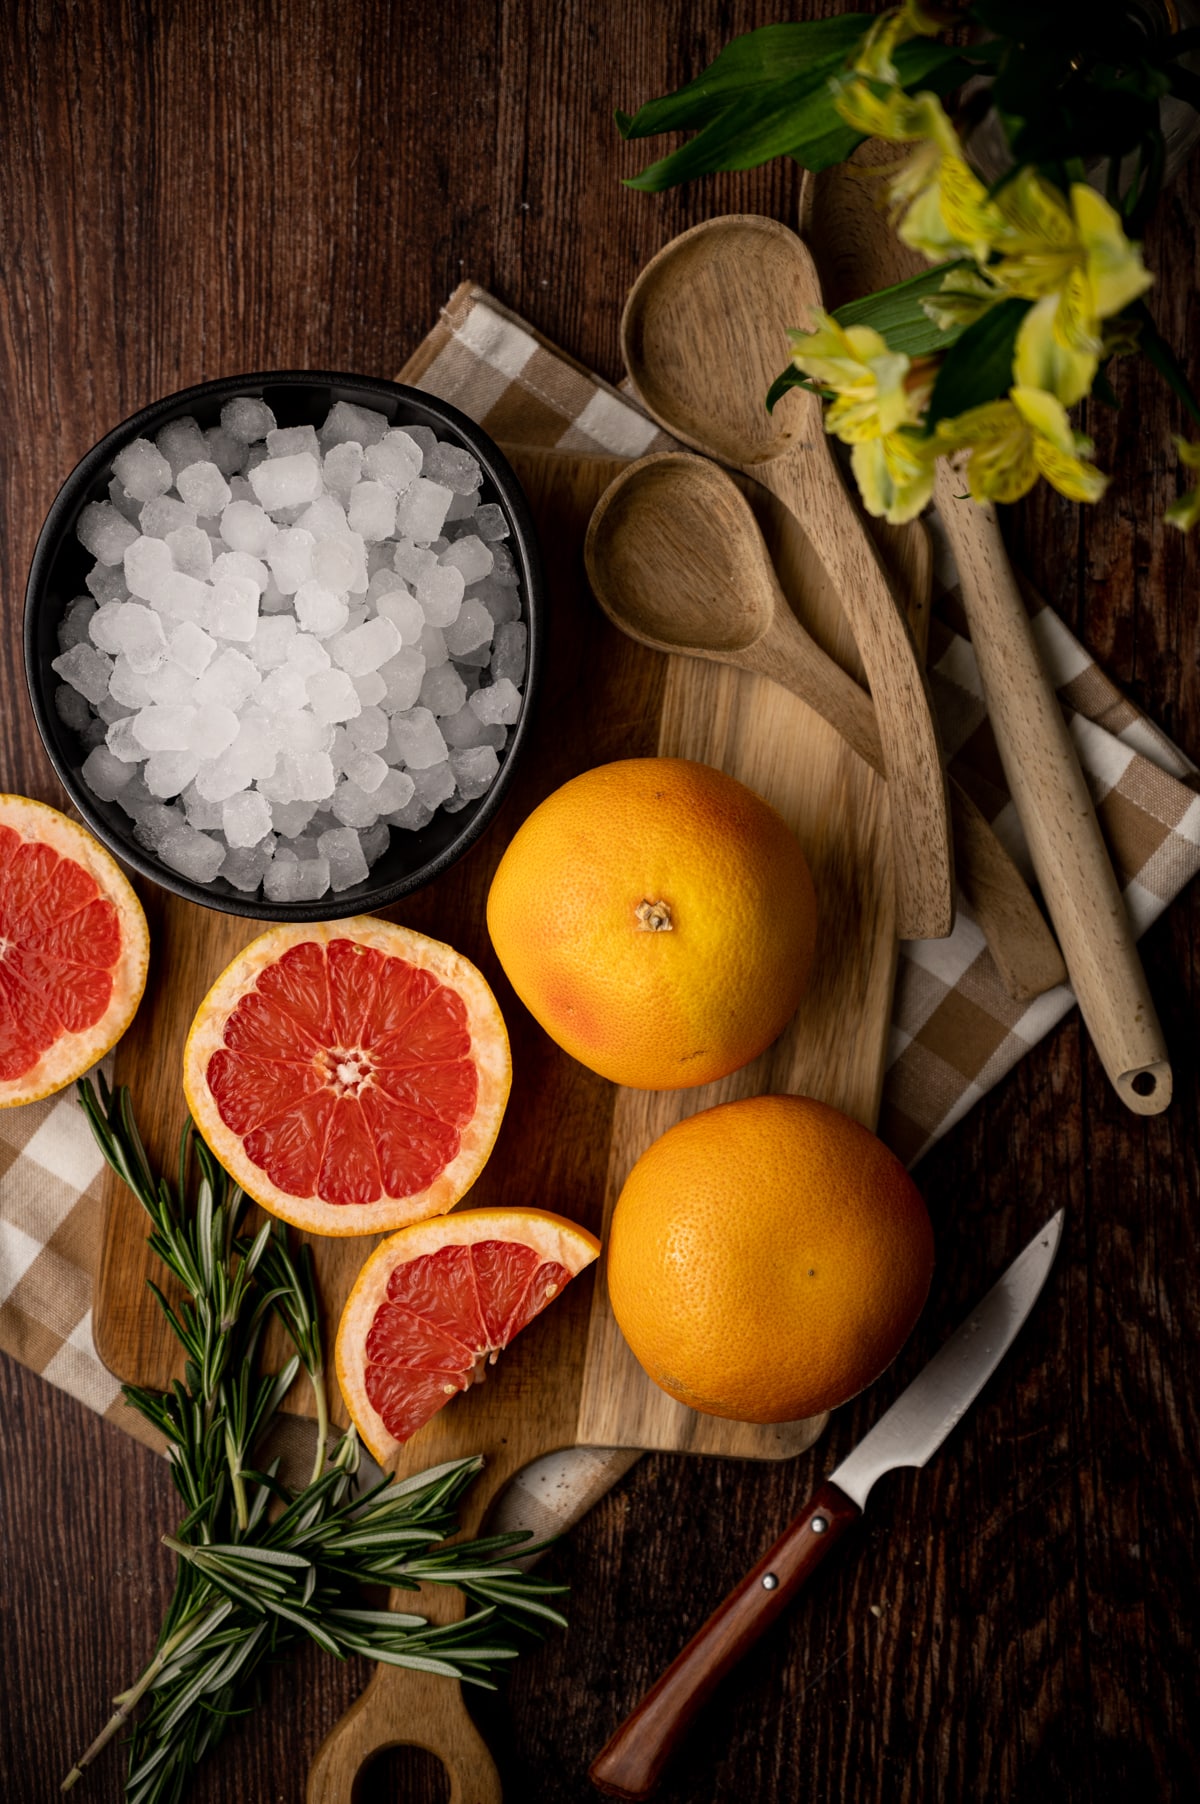 Ingredients for grapefruit water with sprigs of rosemary.